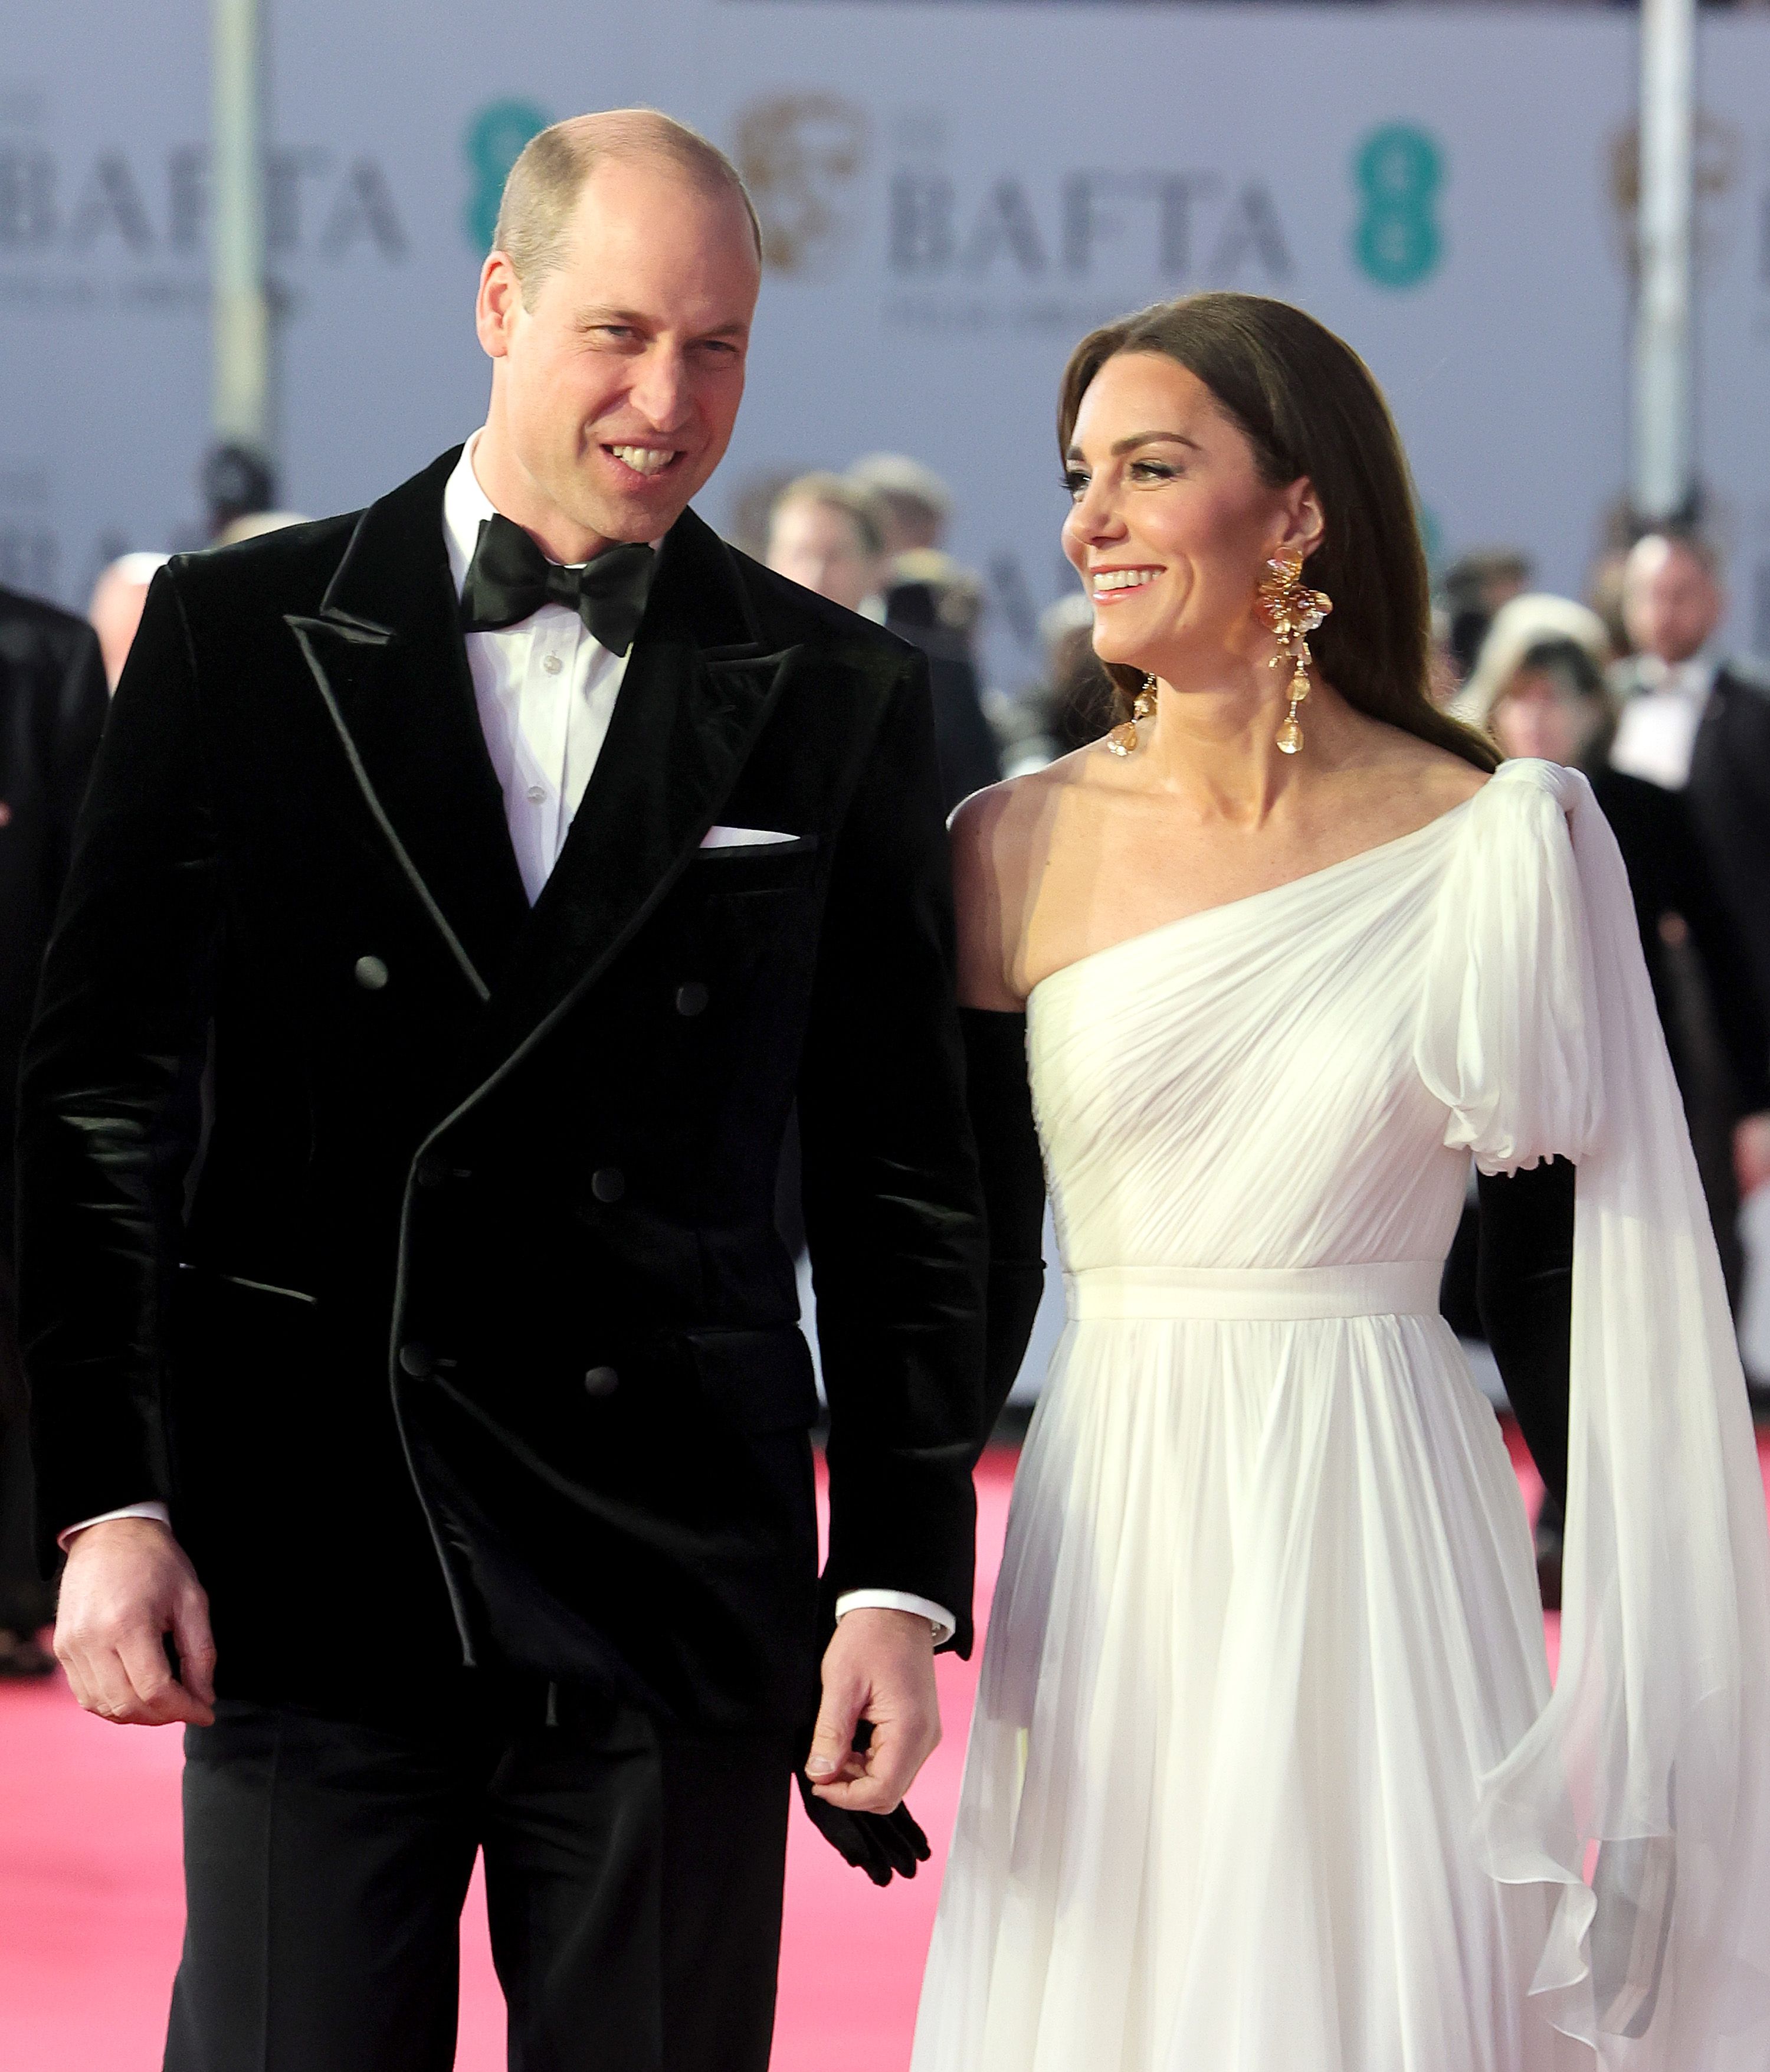 Royal fans are all loving this sweet PDA moment between Prince William ...